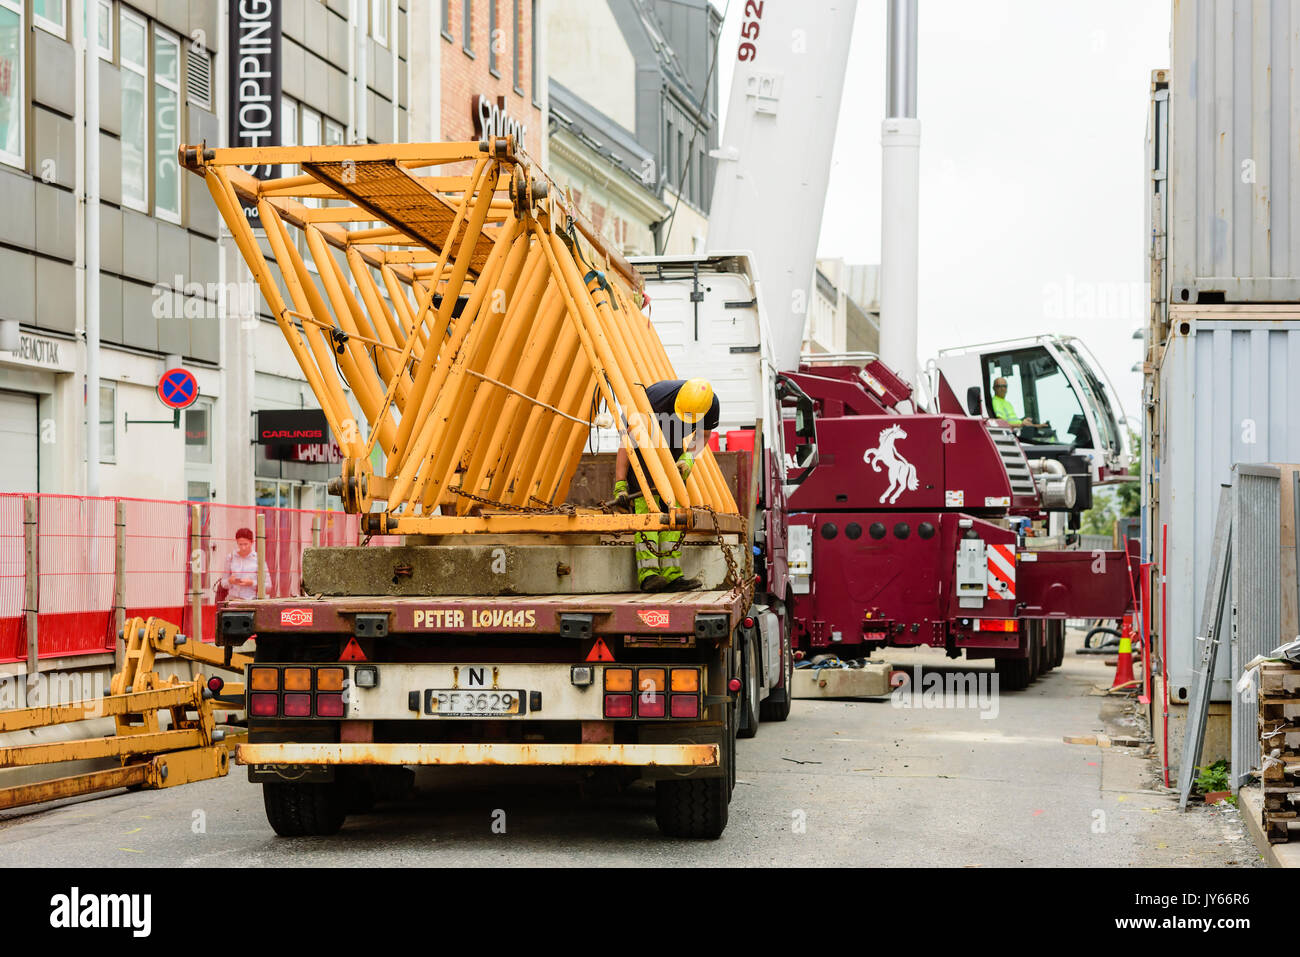 Kristiansand, Norway - August 1, 2017: Documentary of everyday life in the city. Construction worker securing crane parts on truck for transport. Mobi Stock Photo